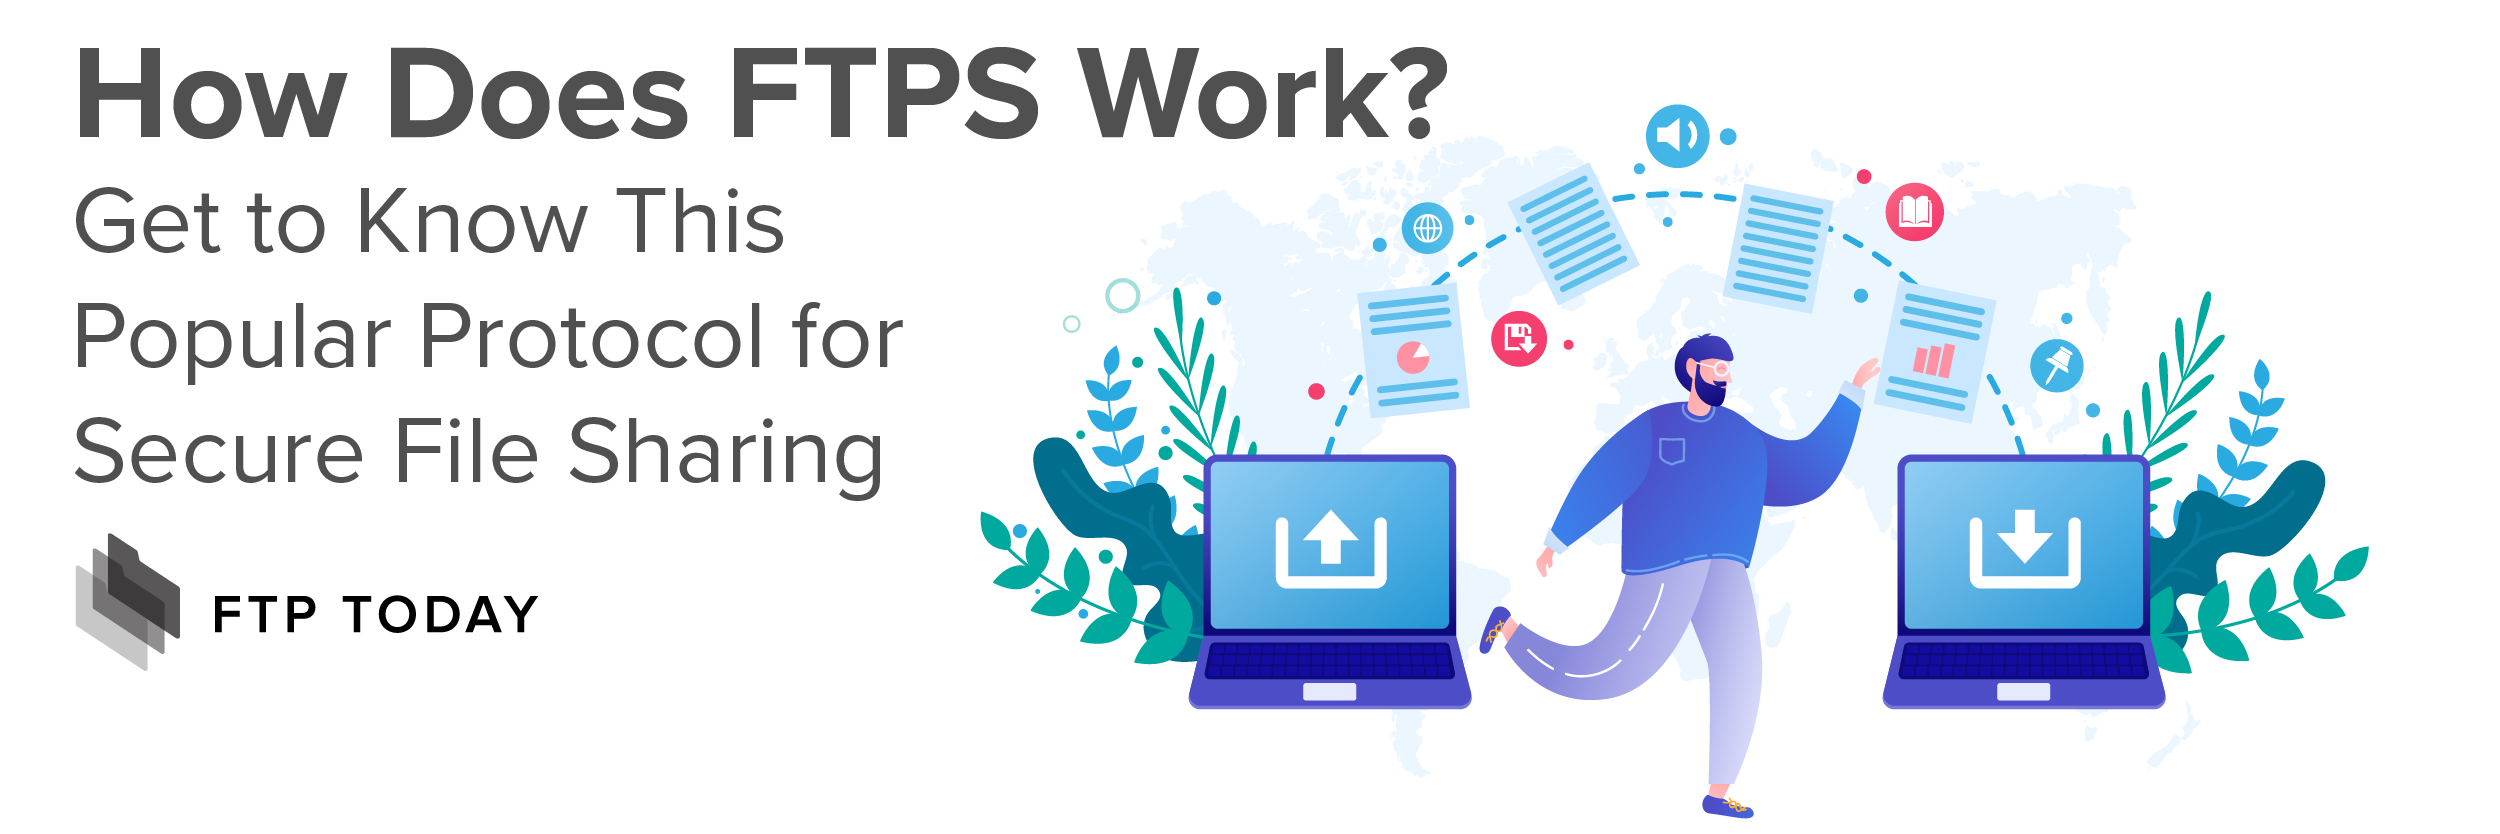 How Does FTPS Work? Get to Know This Popular Protocol for Secure File Sharing